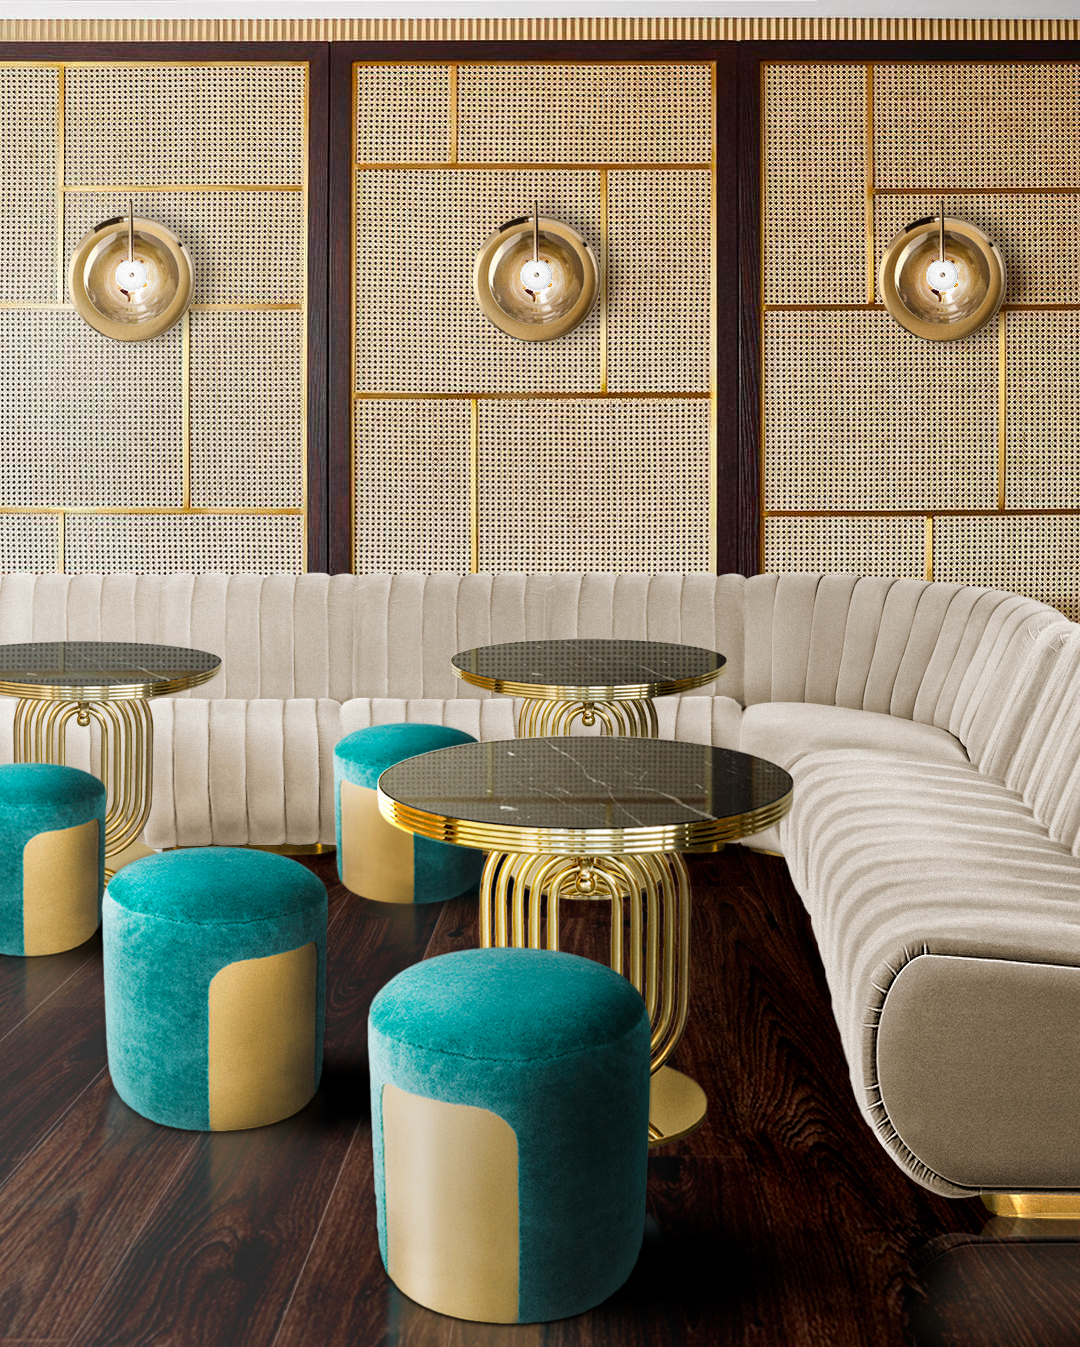 STATEMENT PIECES FOR THE ULTIMATE RESTAURANT PROJECT